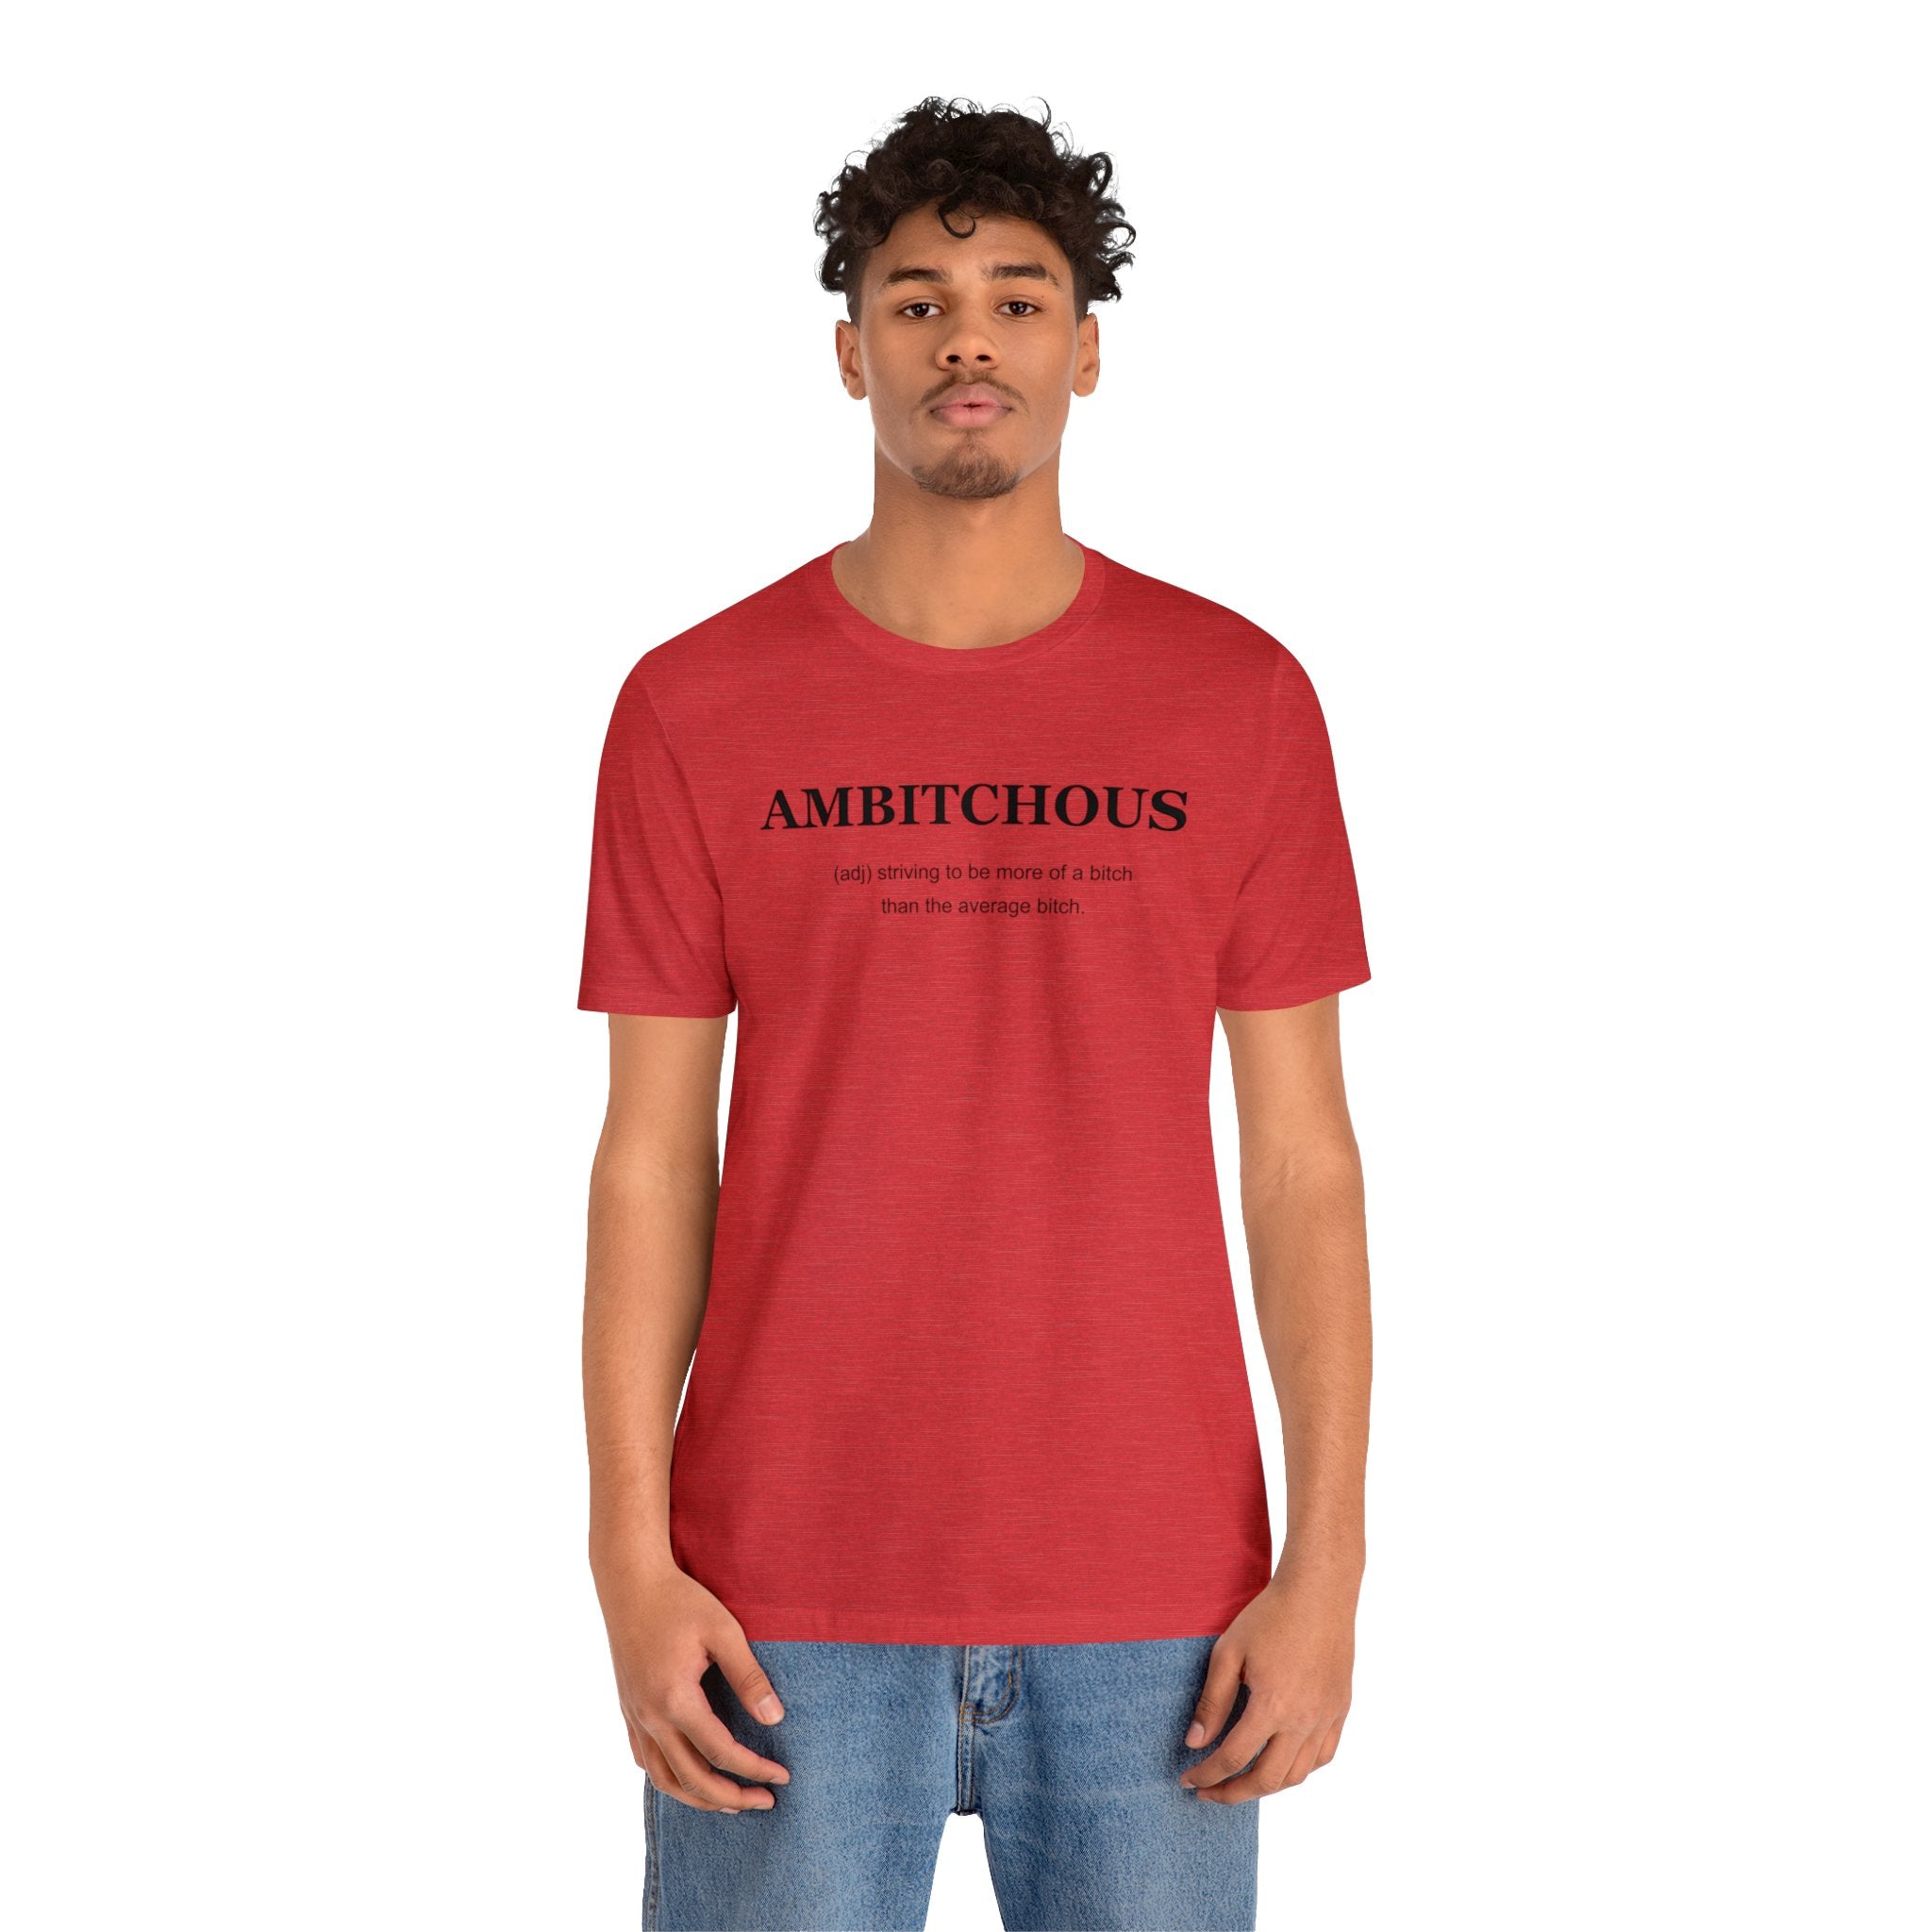 A man wearing a red Ambitchious T-shirt.